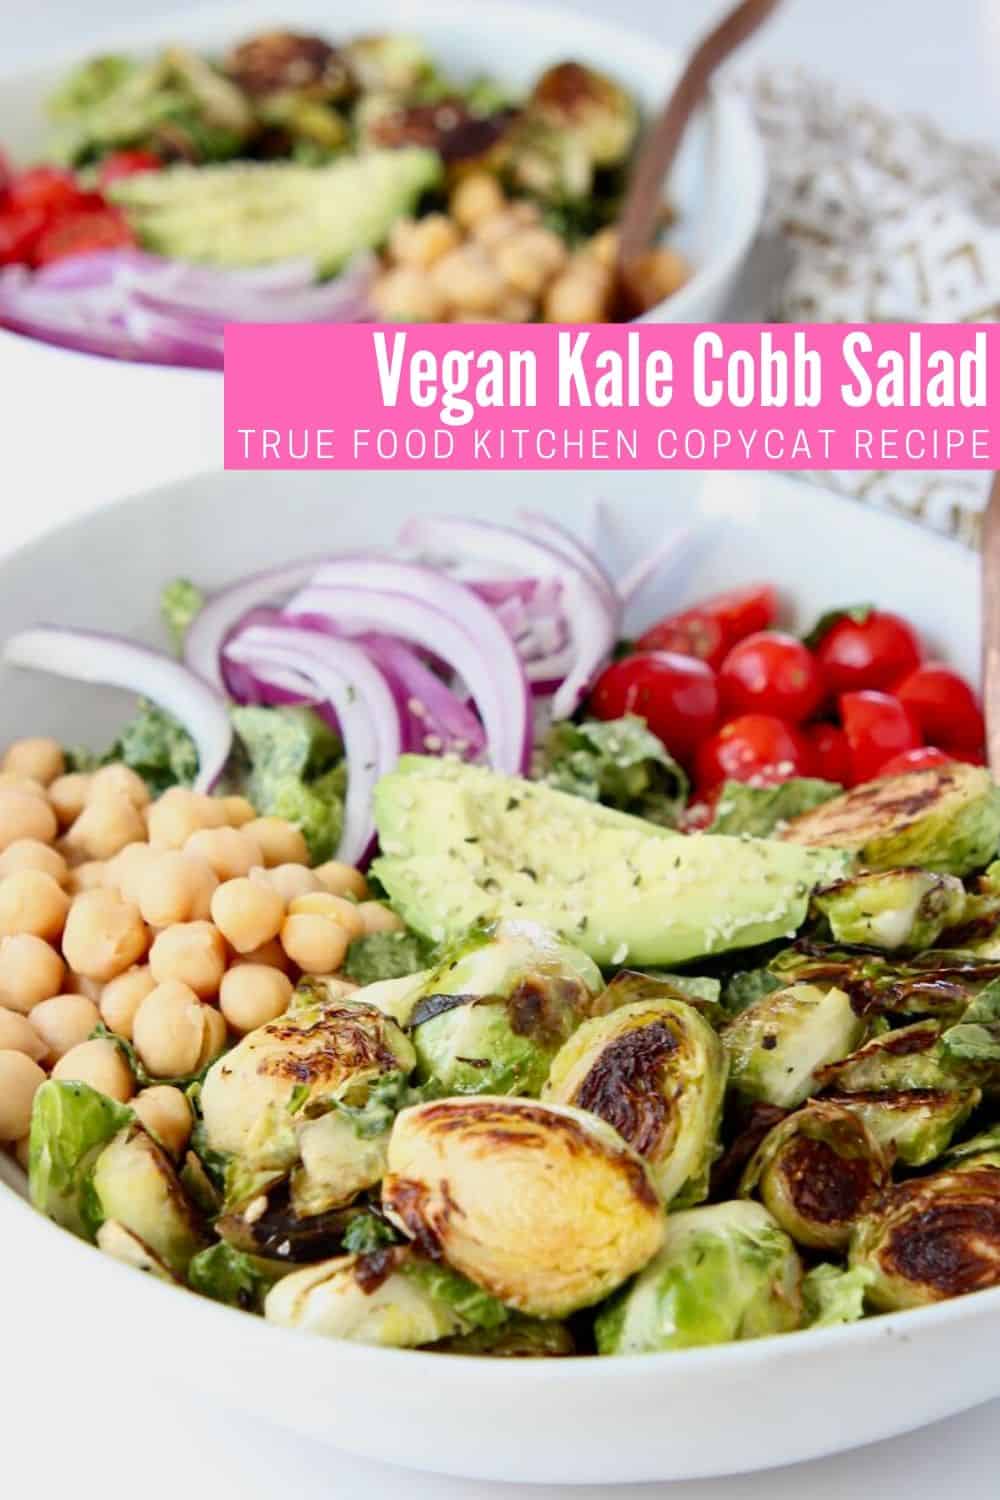 Vegan Cobb Salad with Ranch Dressing - Bowls Are The New Plates